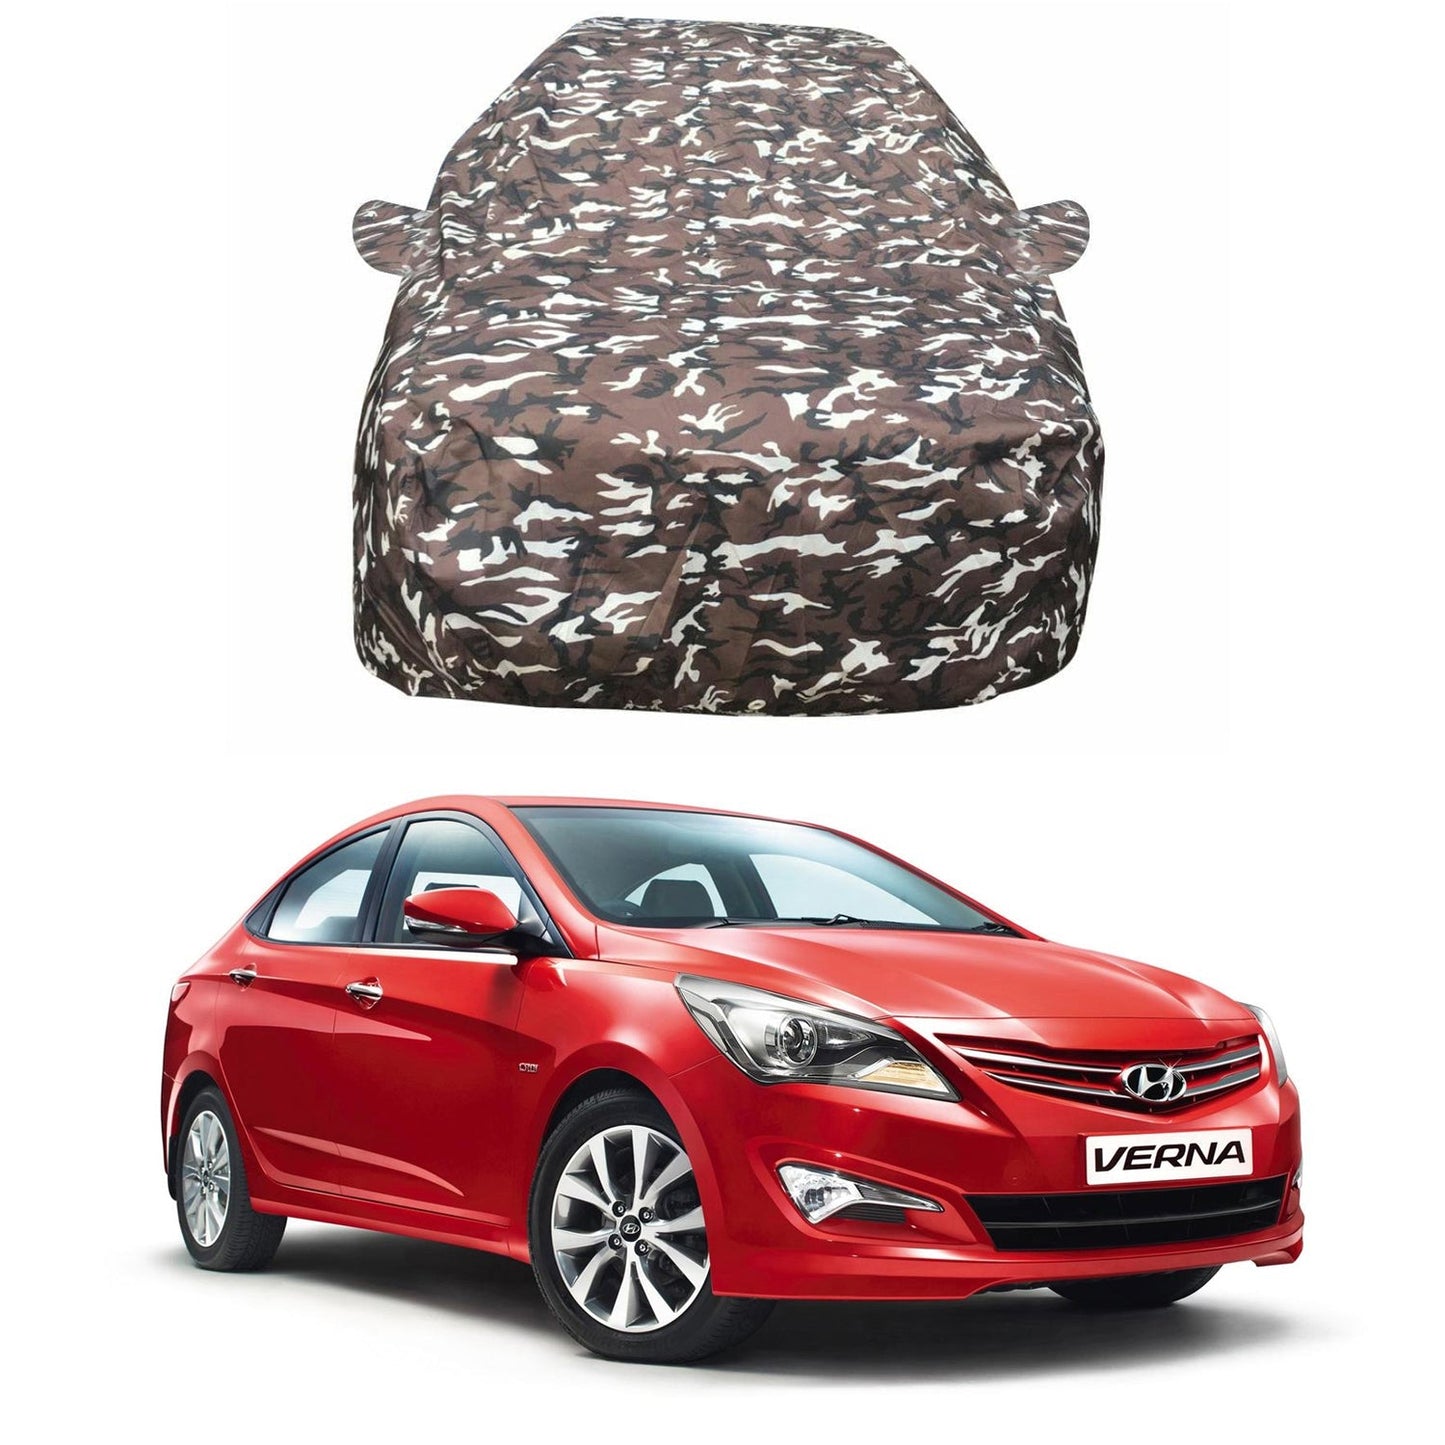 Oshotto Ranger Design Made of 100% Waterproof Fabric Car Body Cover with Mirror Pockets For Hyundai Verna Fluidic